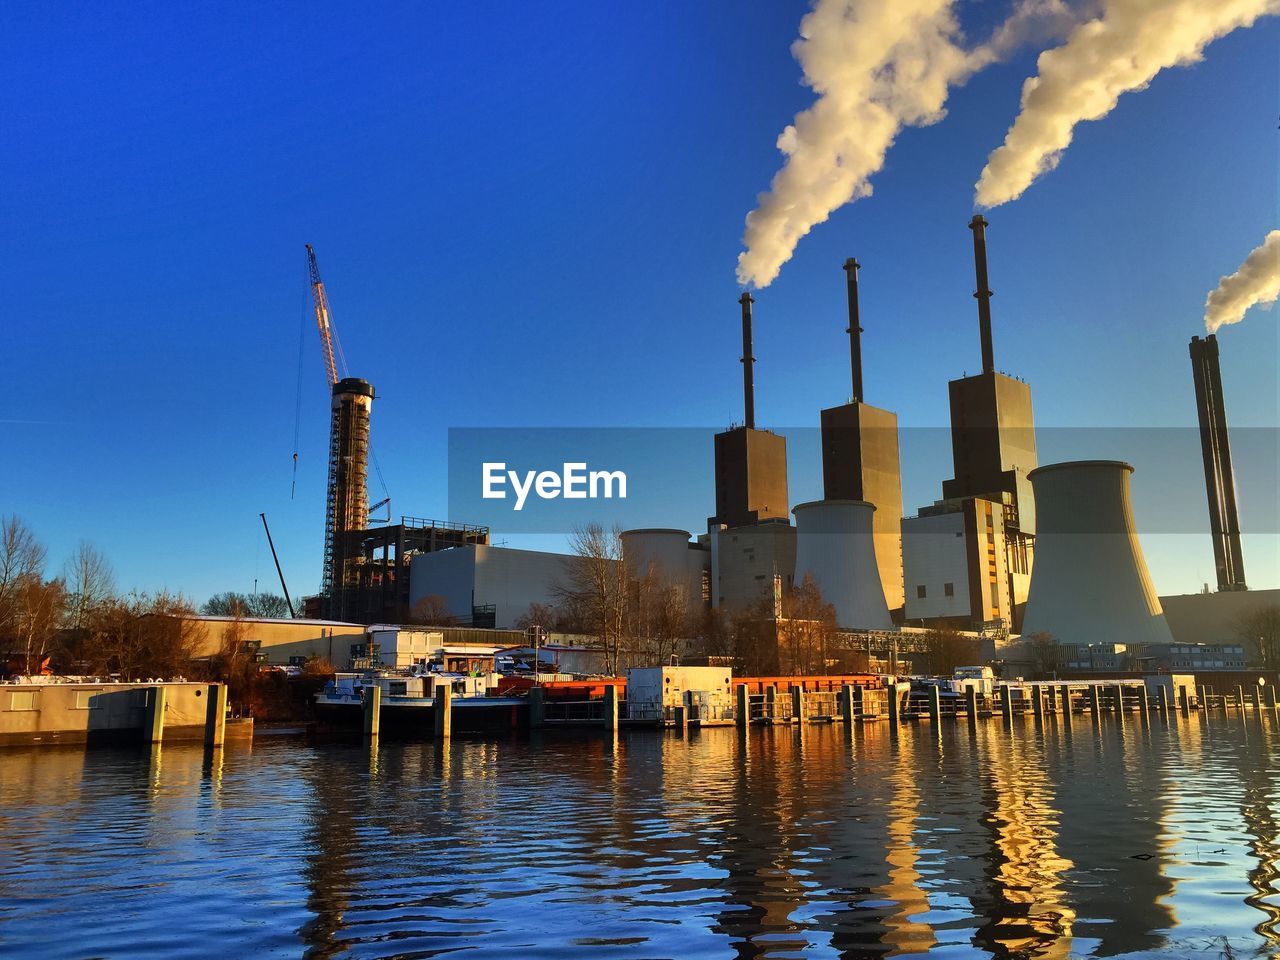 Power station on riverbank emitting smoke against clear blue sky